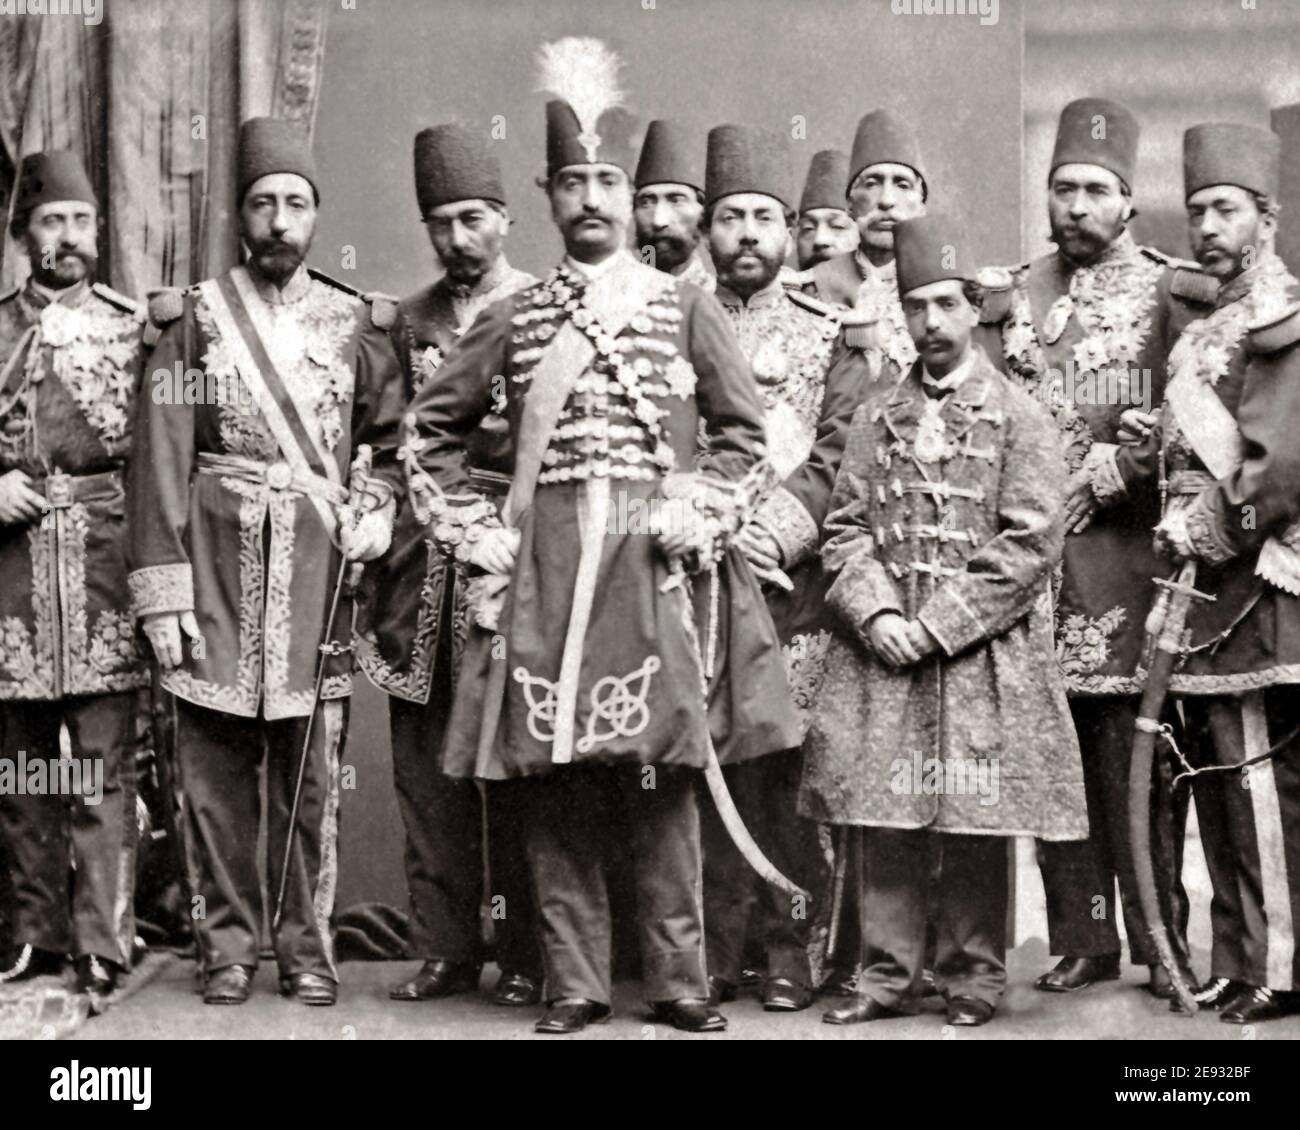 Late 19th Century Photograph Shah Of Persia On Visit To Britain 1870 S Naser Al Din Shah